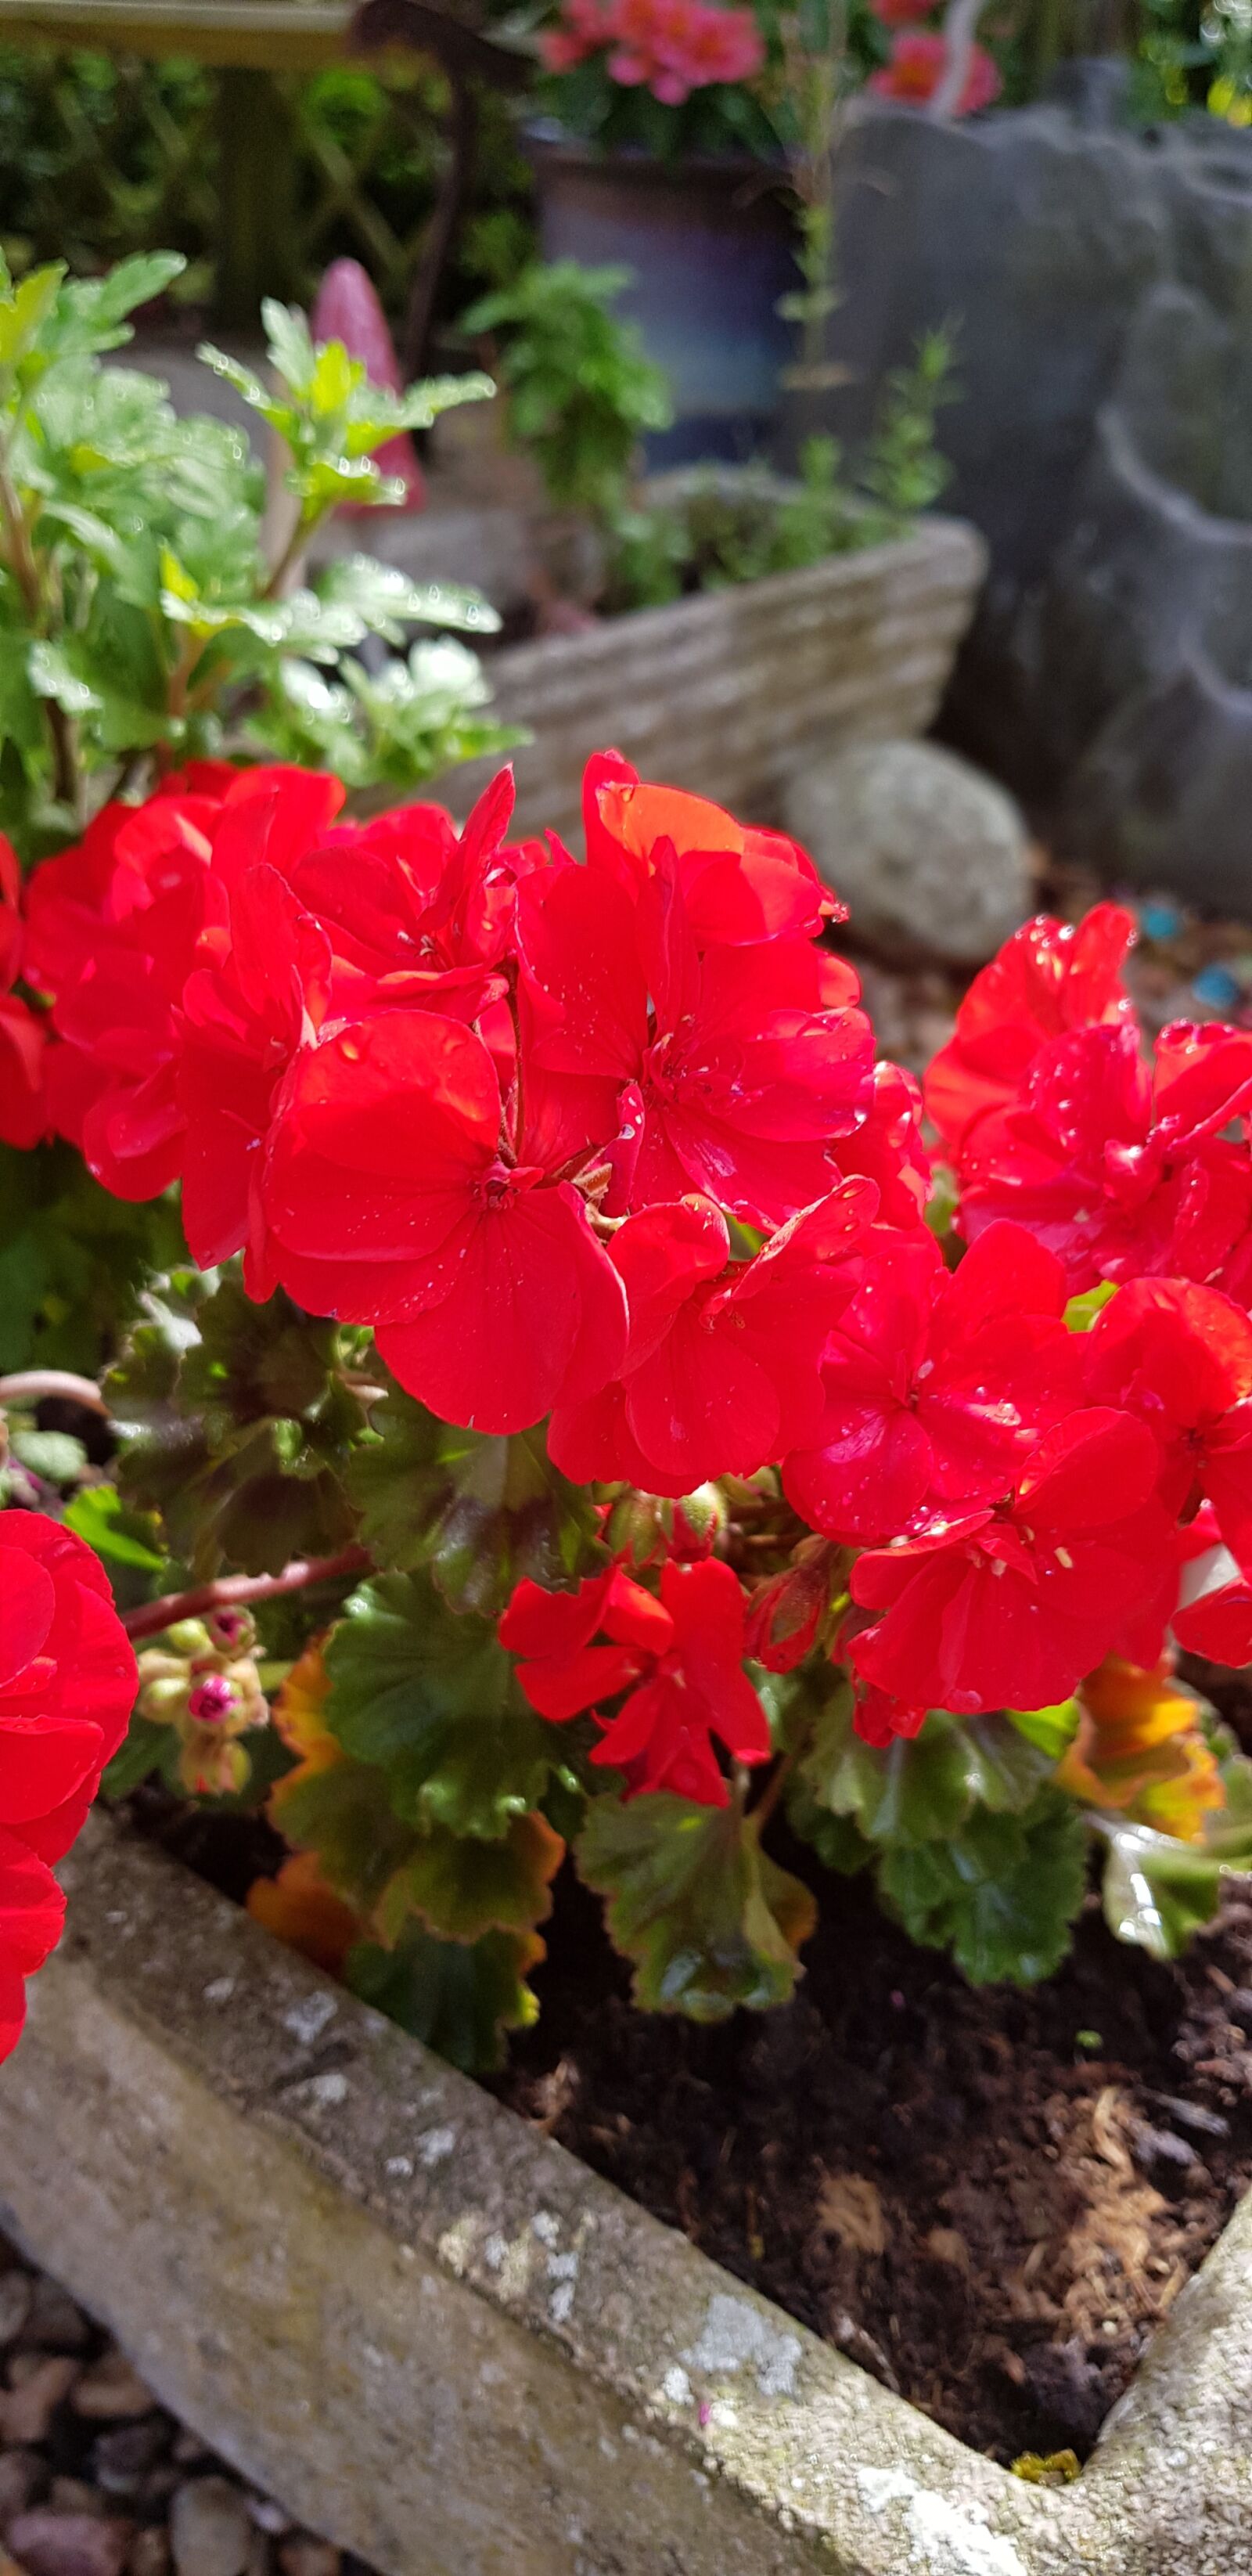 Samsung Galaxy S8 sample photo. Red, geraniums, plant photography